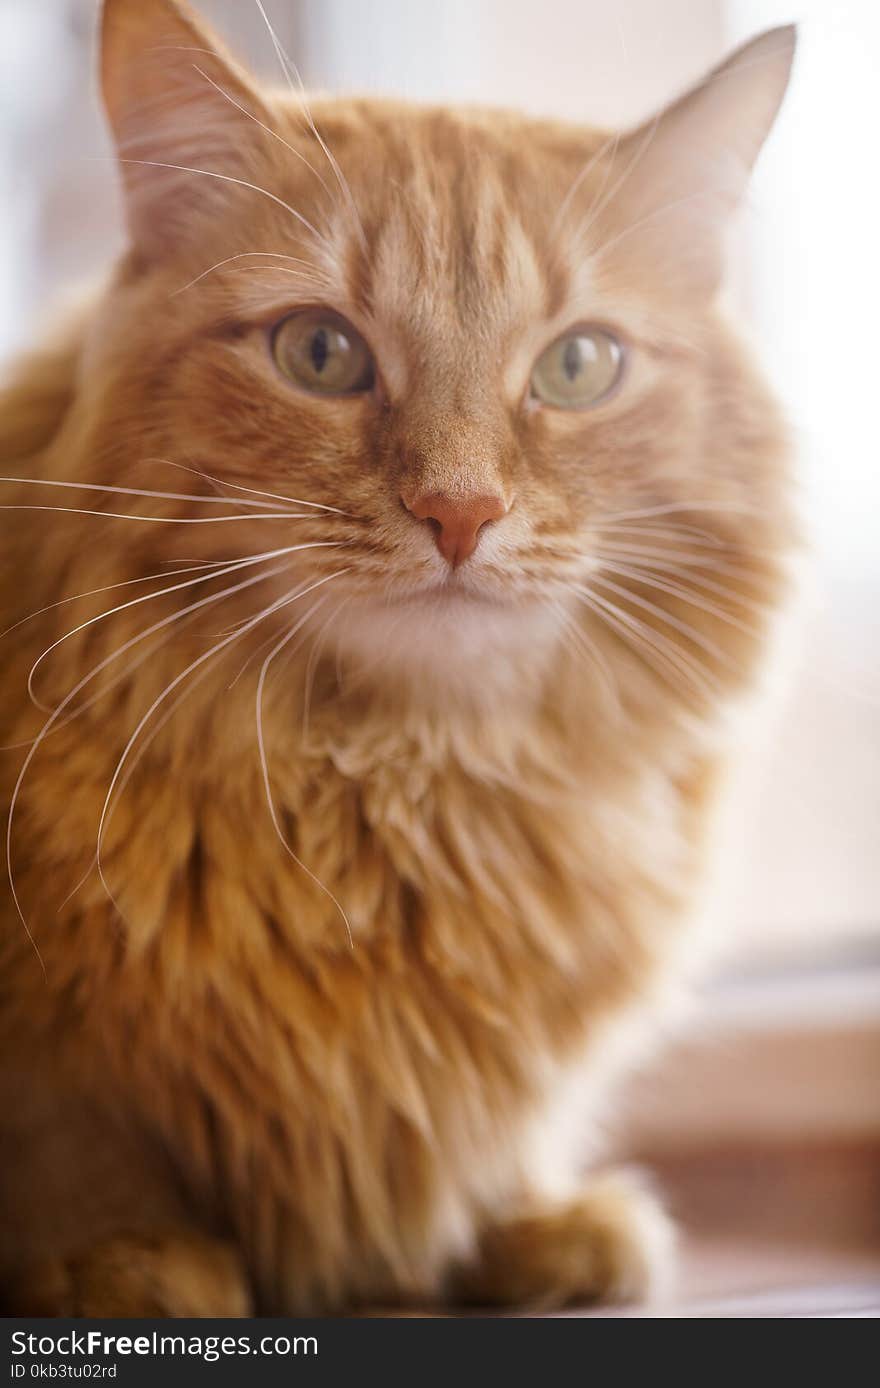 Close up Photo of Red Fluffy Tabby Male Cat with Green Eyes Looking Straight Towards Camera. Close up Photo of Red Fluffy Tabby Male Cat with Green Eyes Looking Straight Towards Camera